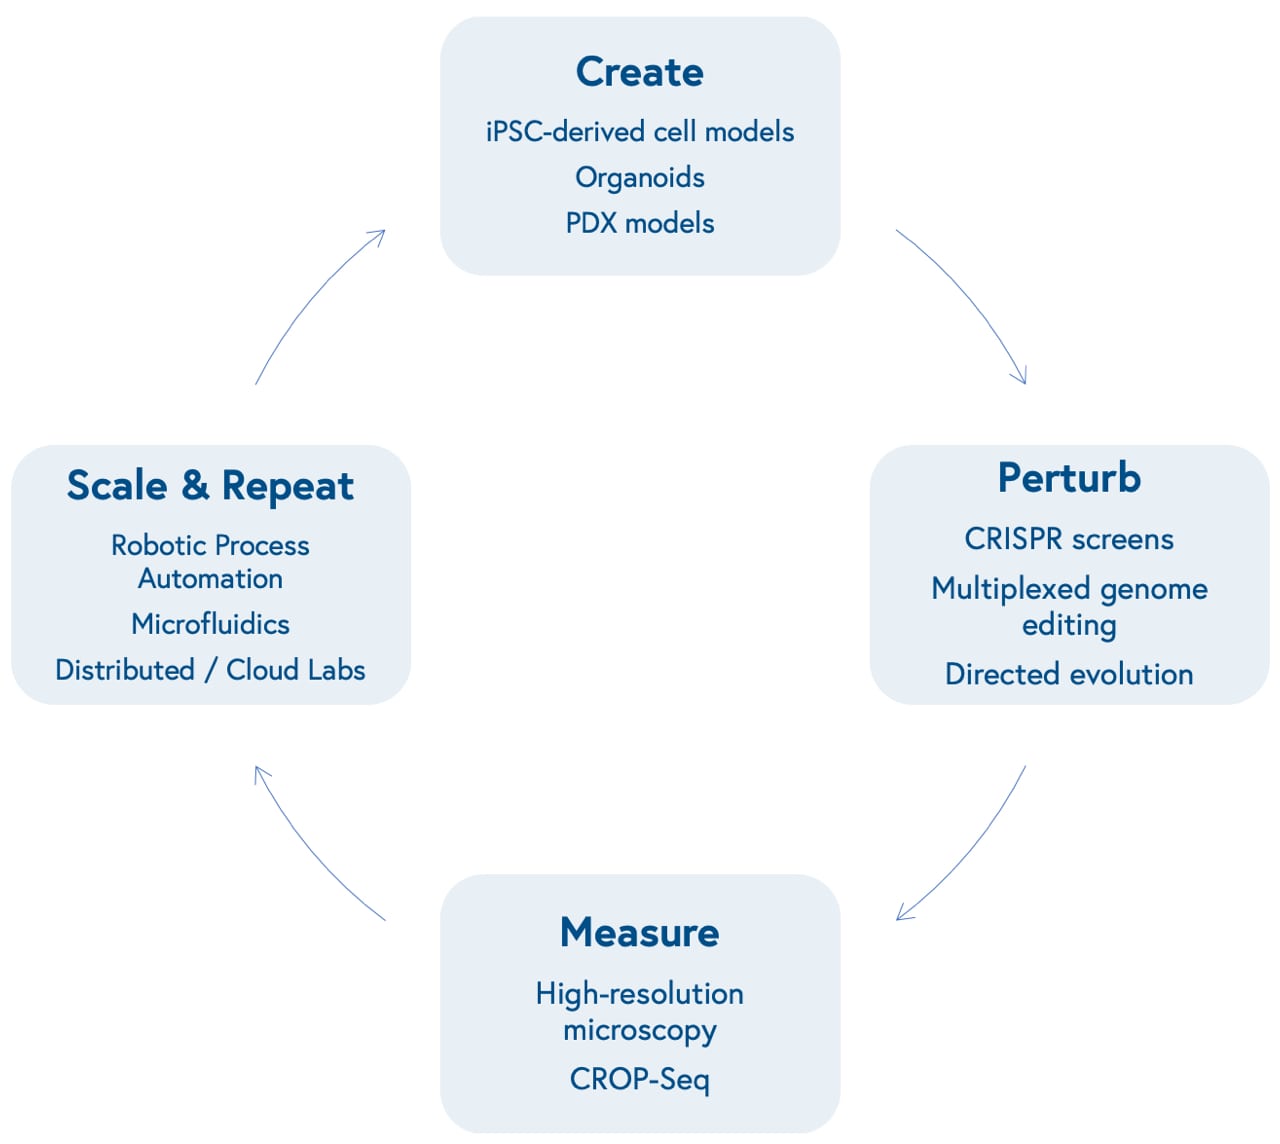 Info graphic displaying the cycle of Create, Perturb, Measure, and Scale & Repeat